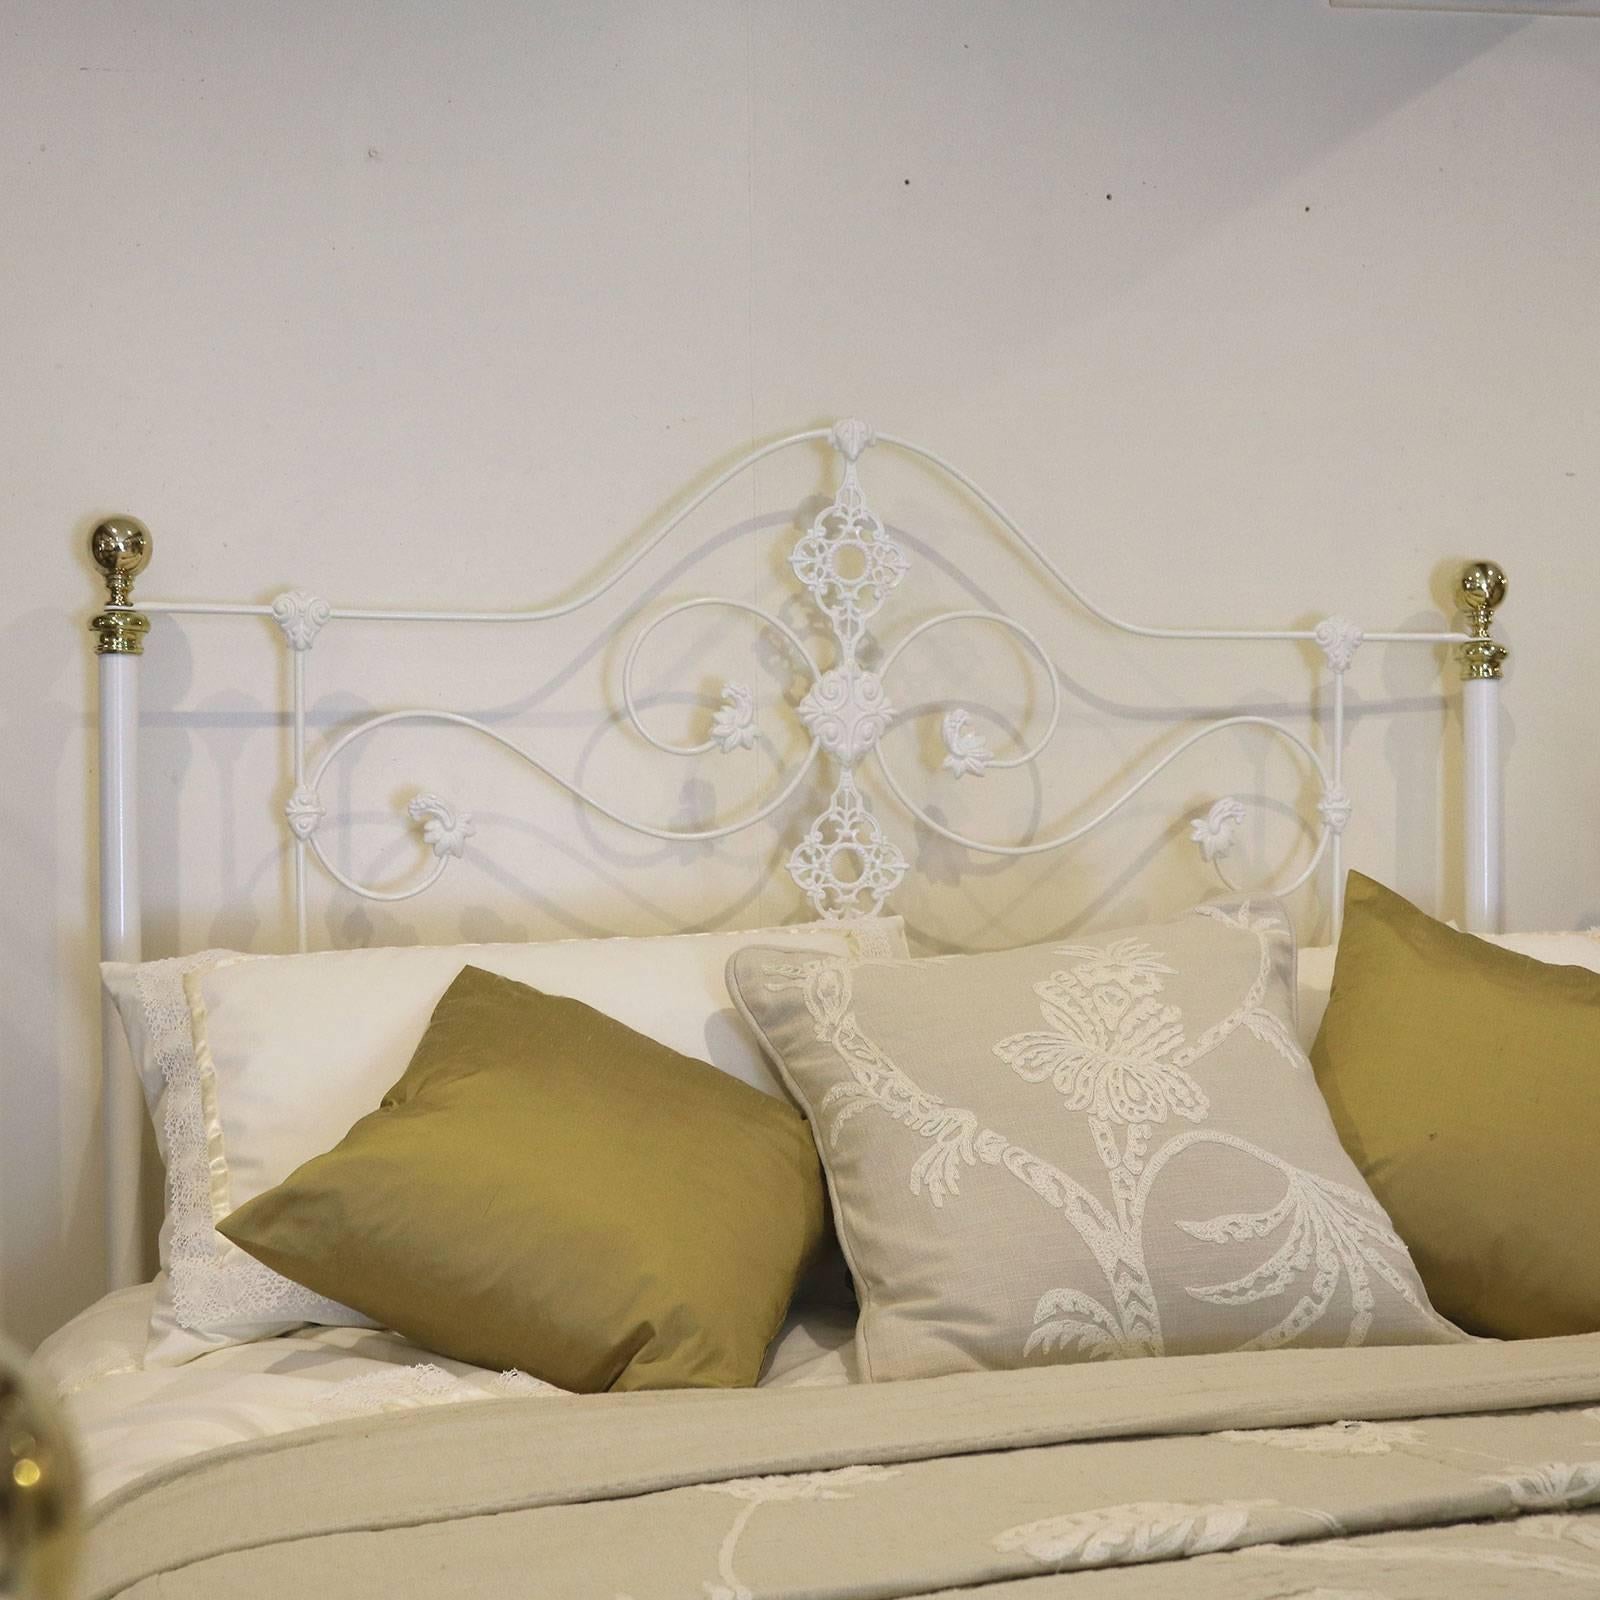 A fine mid-Victorian cast iron bed finished in antique white with ornate castings and brass finials.

This bed accepts a British king-size or American queen-size (60 in or 5 ft wide) base and mattress set.

The price is for the bed frame alone.